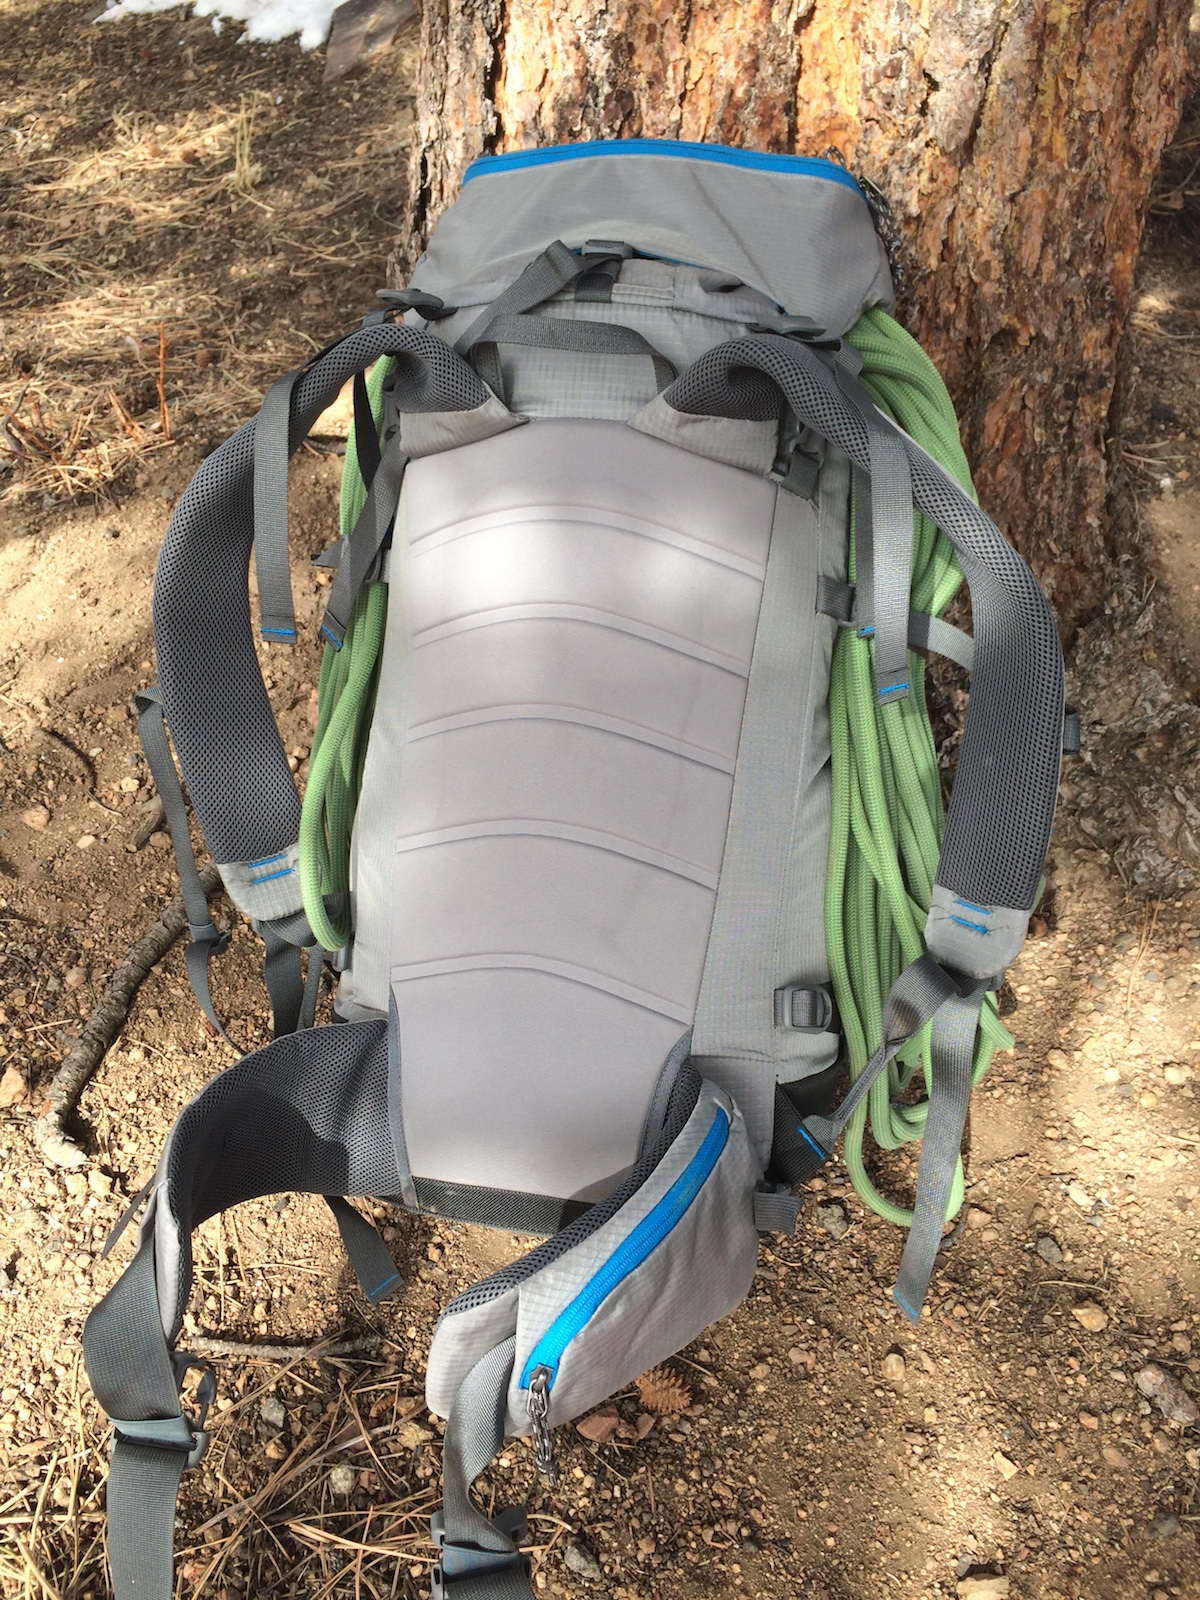 The Yeti 50L pack has a simple and streamlined, yet comfortable and durable back pad. Here, the hip-belt pocket can be seen as well as the non-releasable lower lateral compression strap down towards the bottom of the dangling rope on the right side. [Photo] Mike Lewis